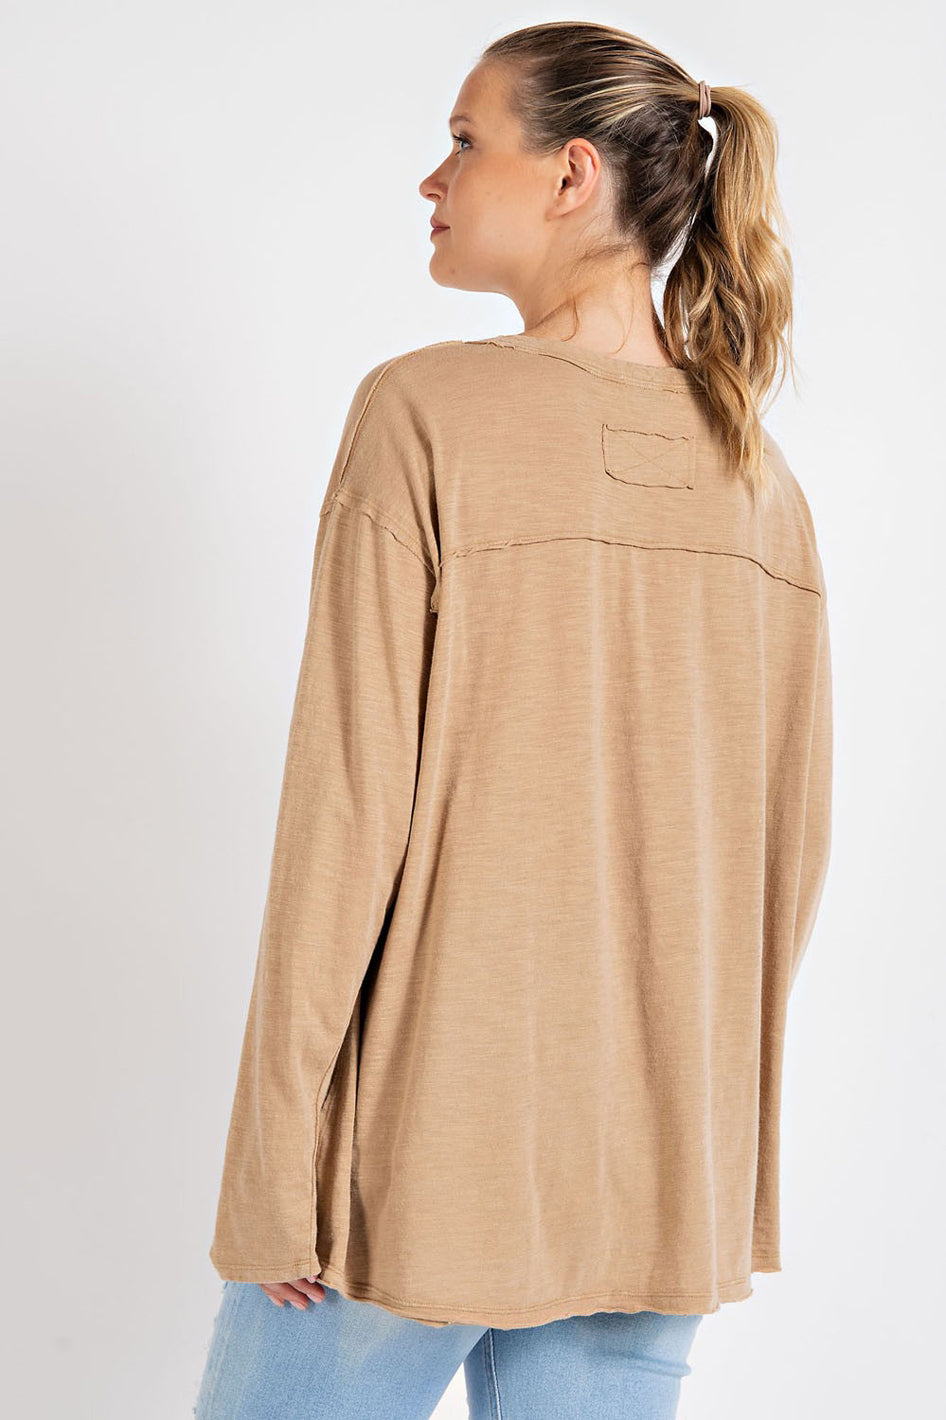 Mineral Washed Round Neckline Long Sleeves Top - Azoroh